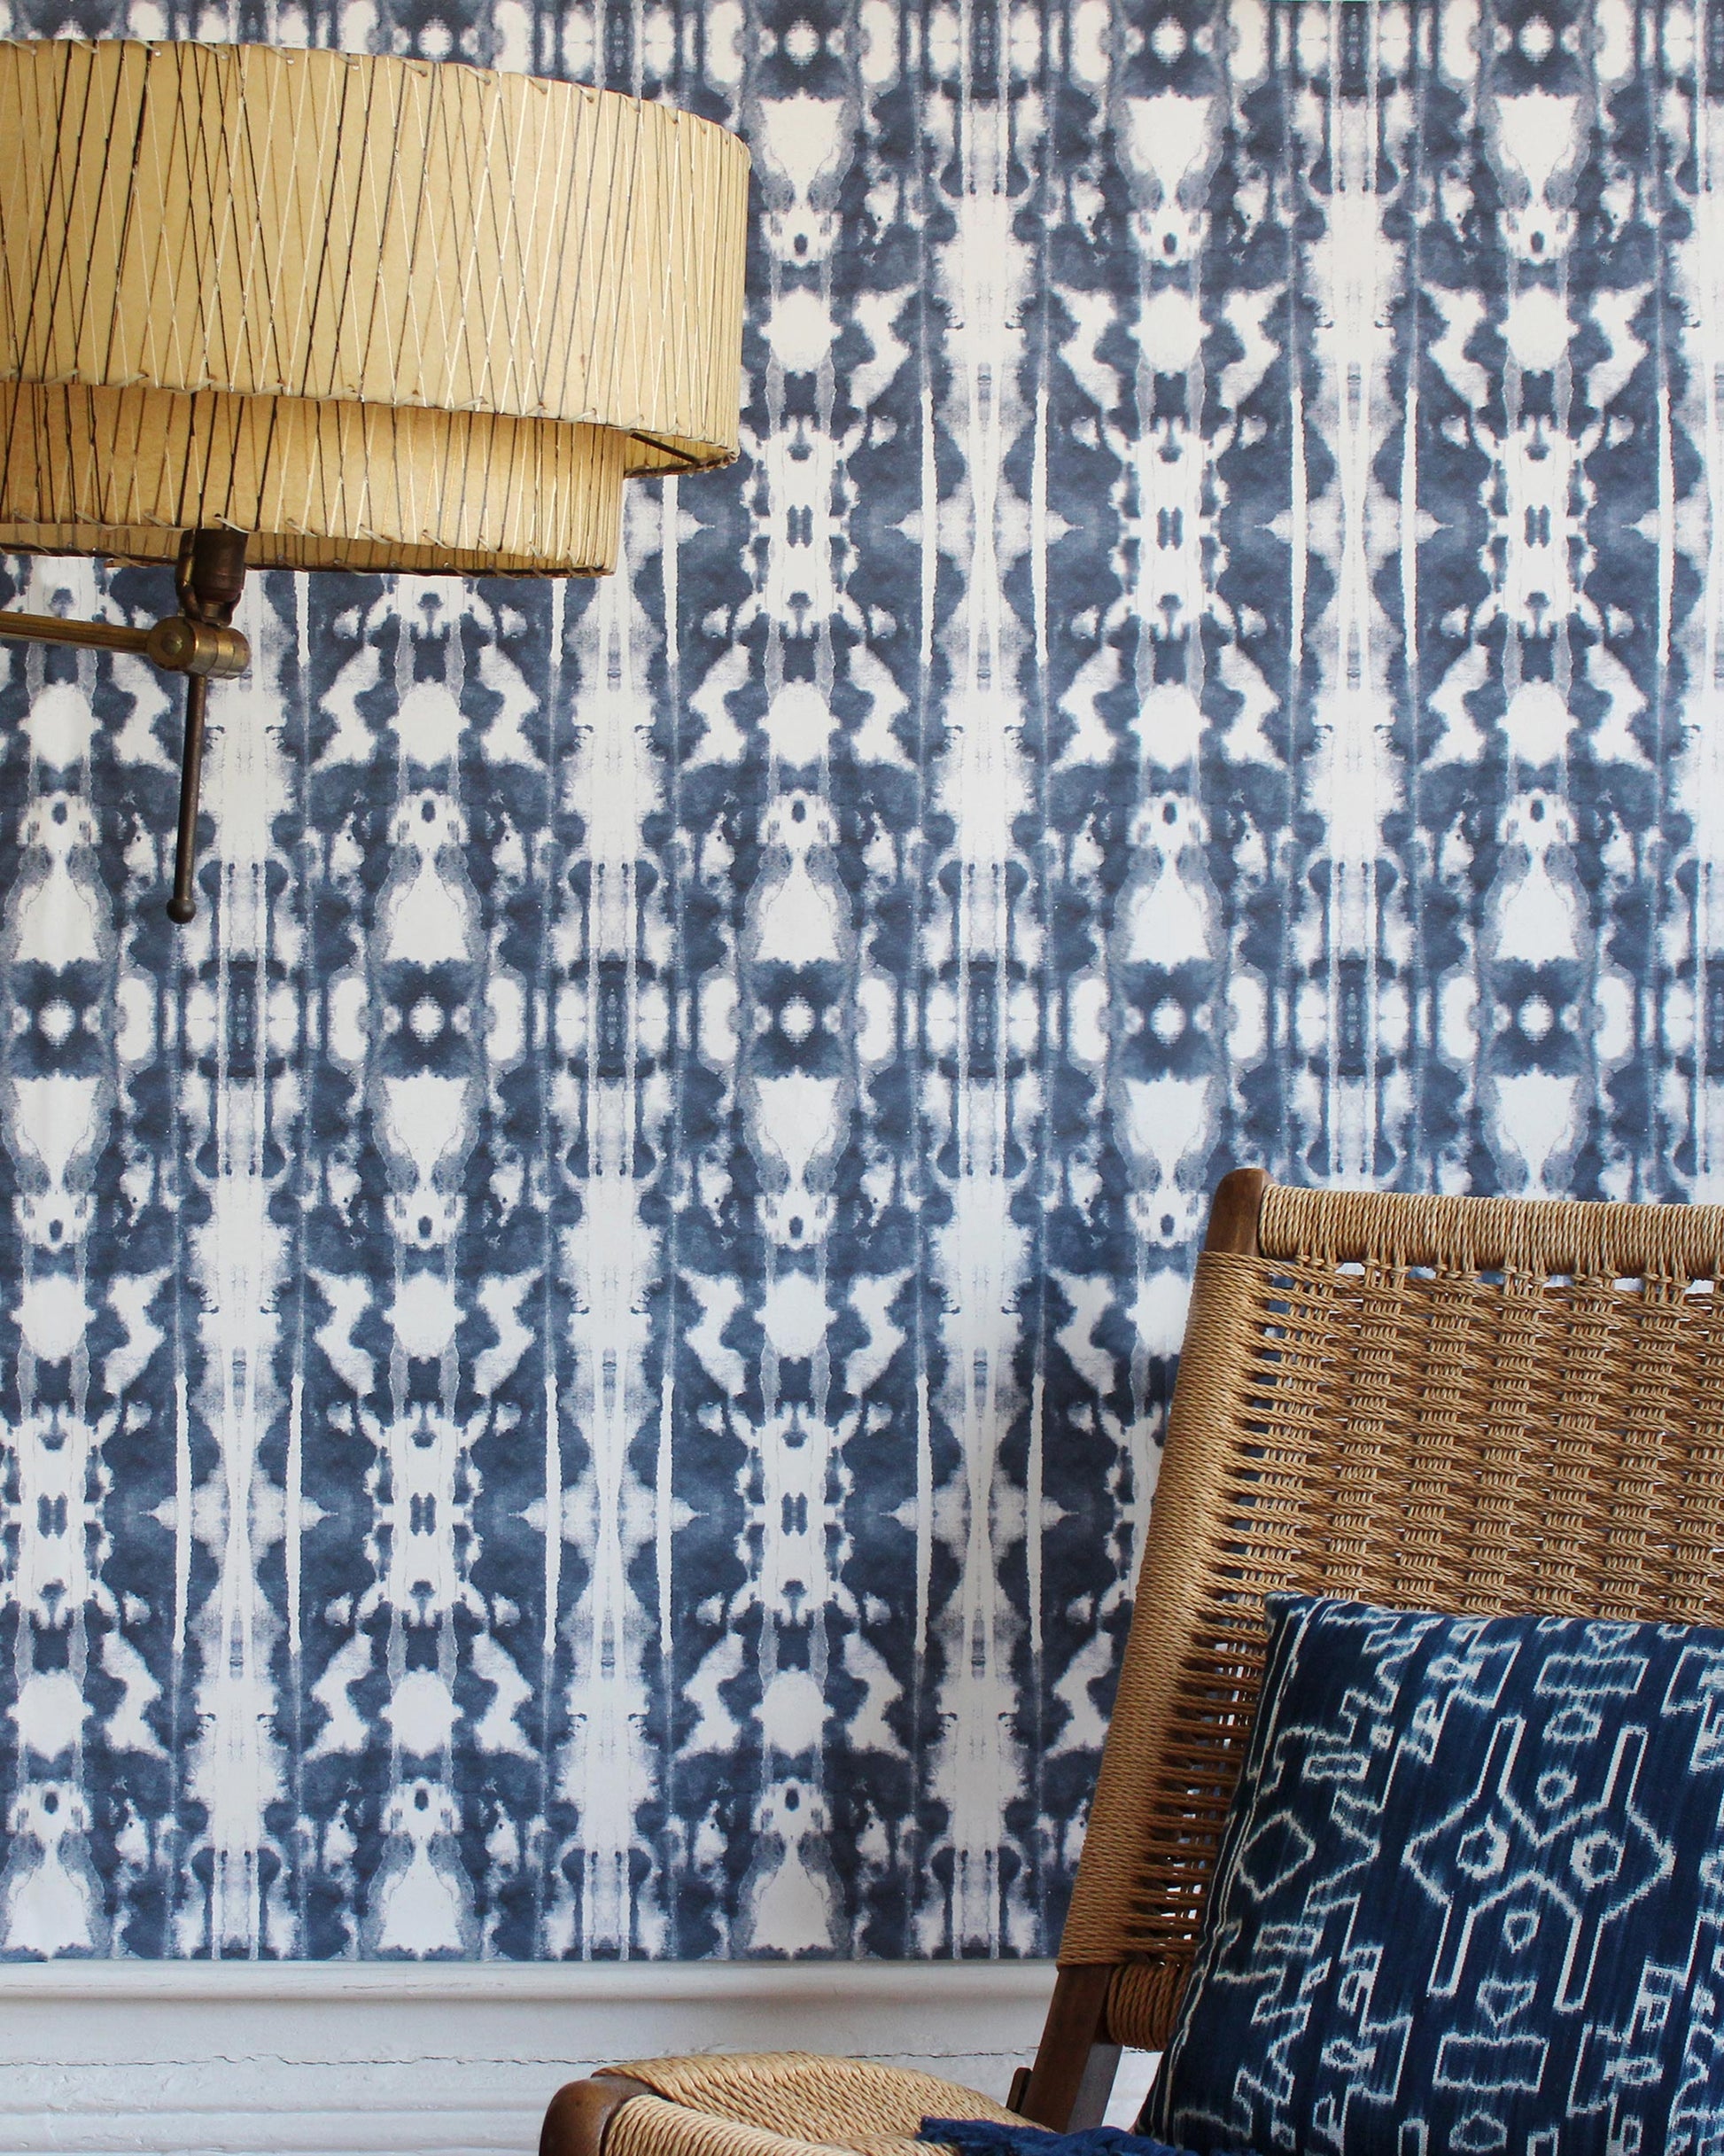 A wicker chair in front of a blue and white luxury Biami Wallpaper with the Nila pattern